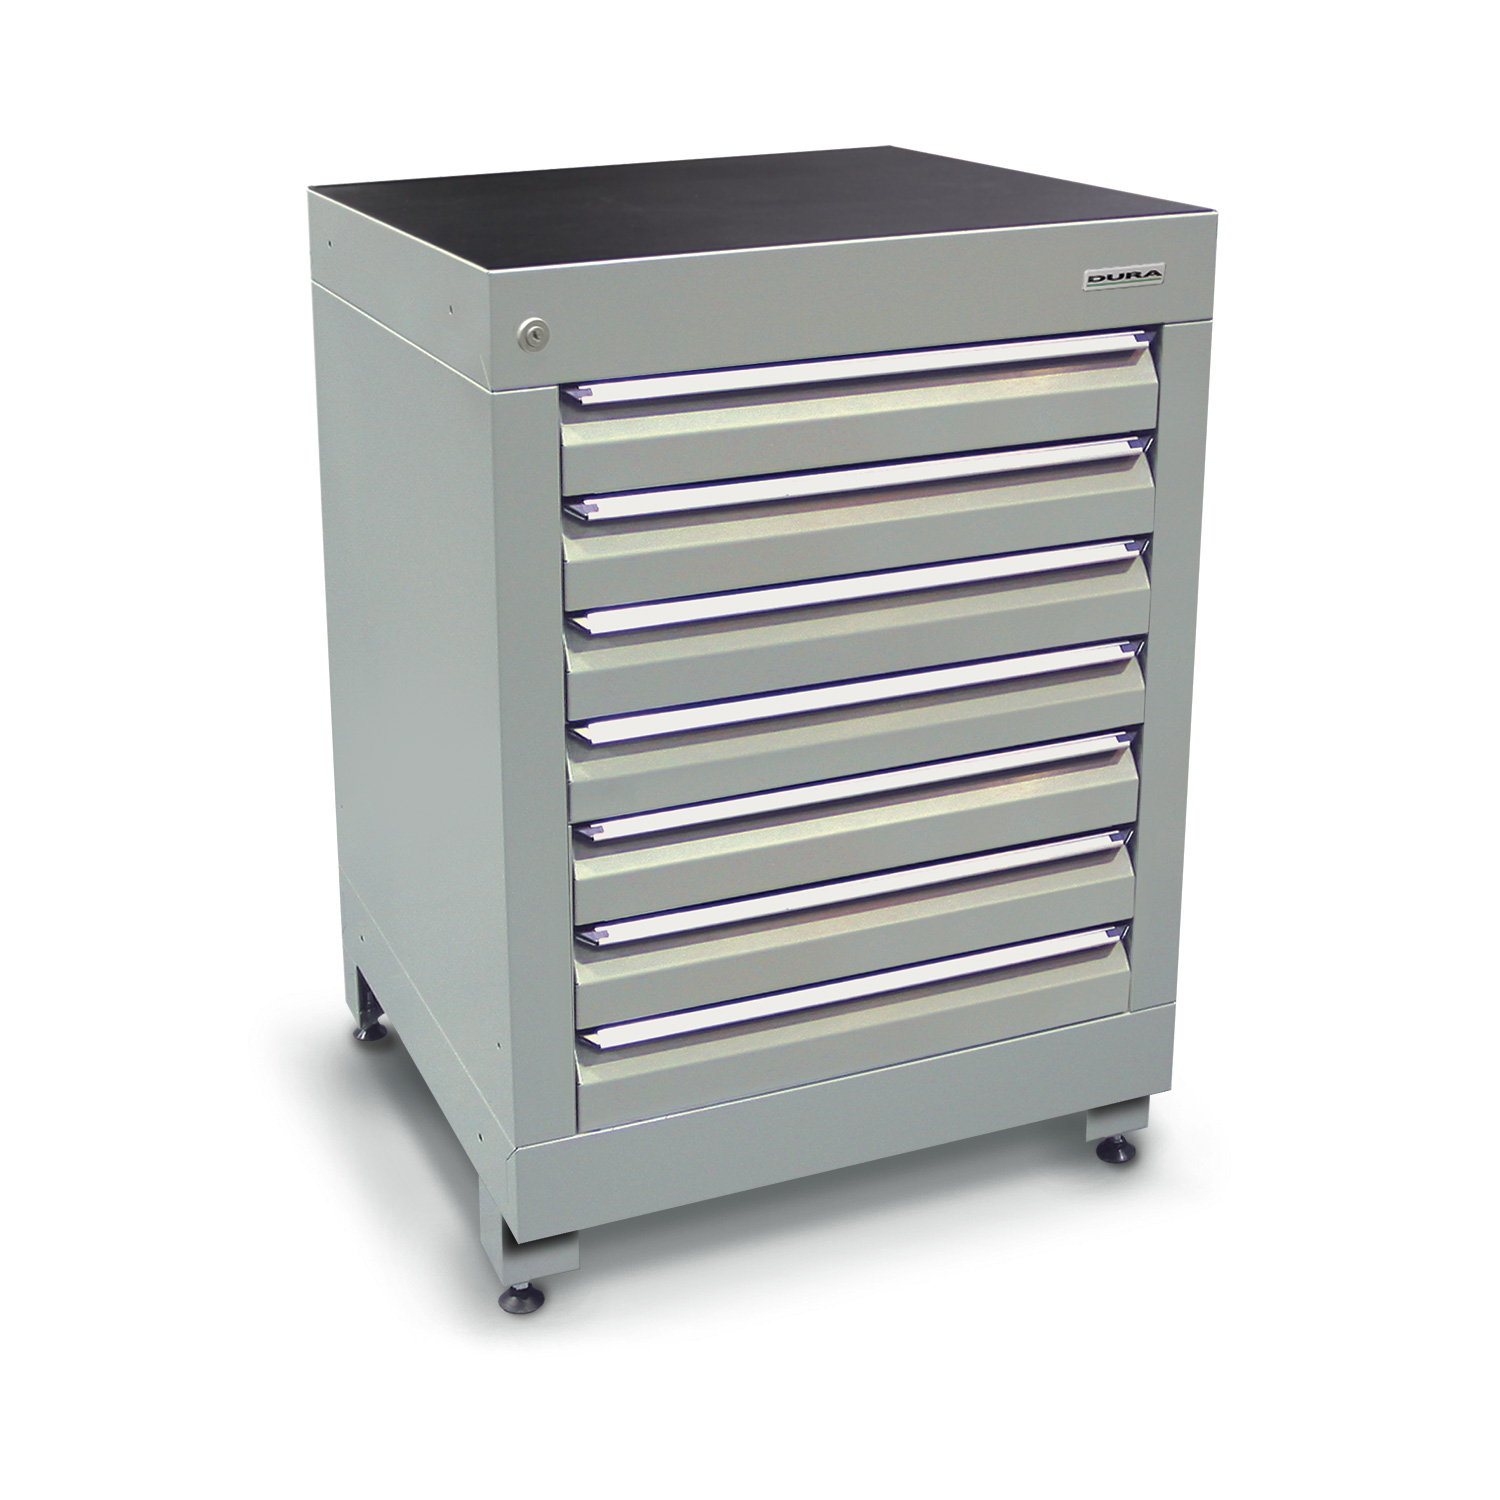 600 series cabinet (with 7 drawers and feet)